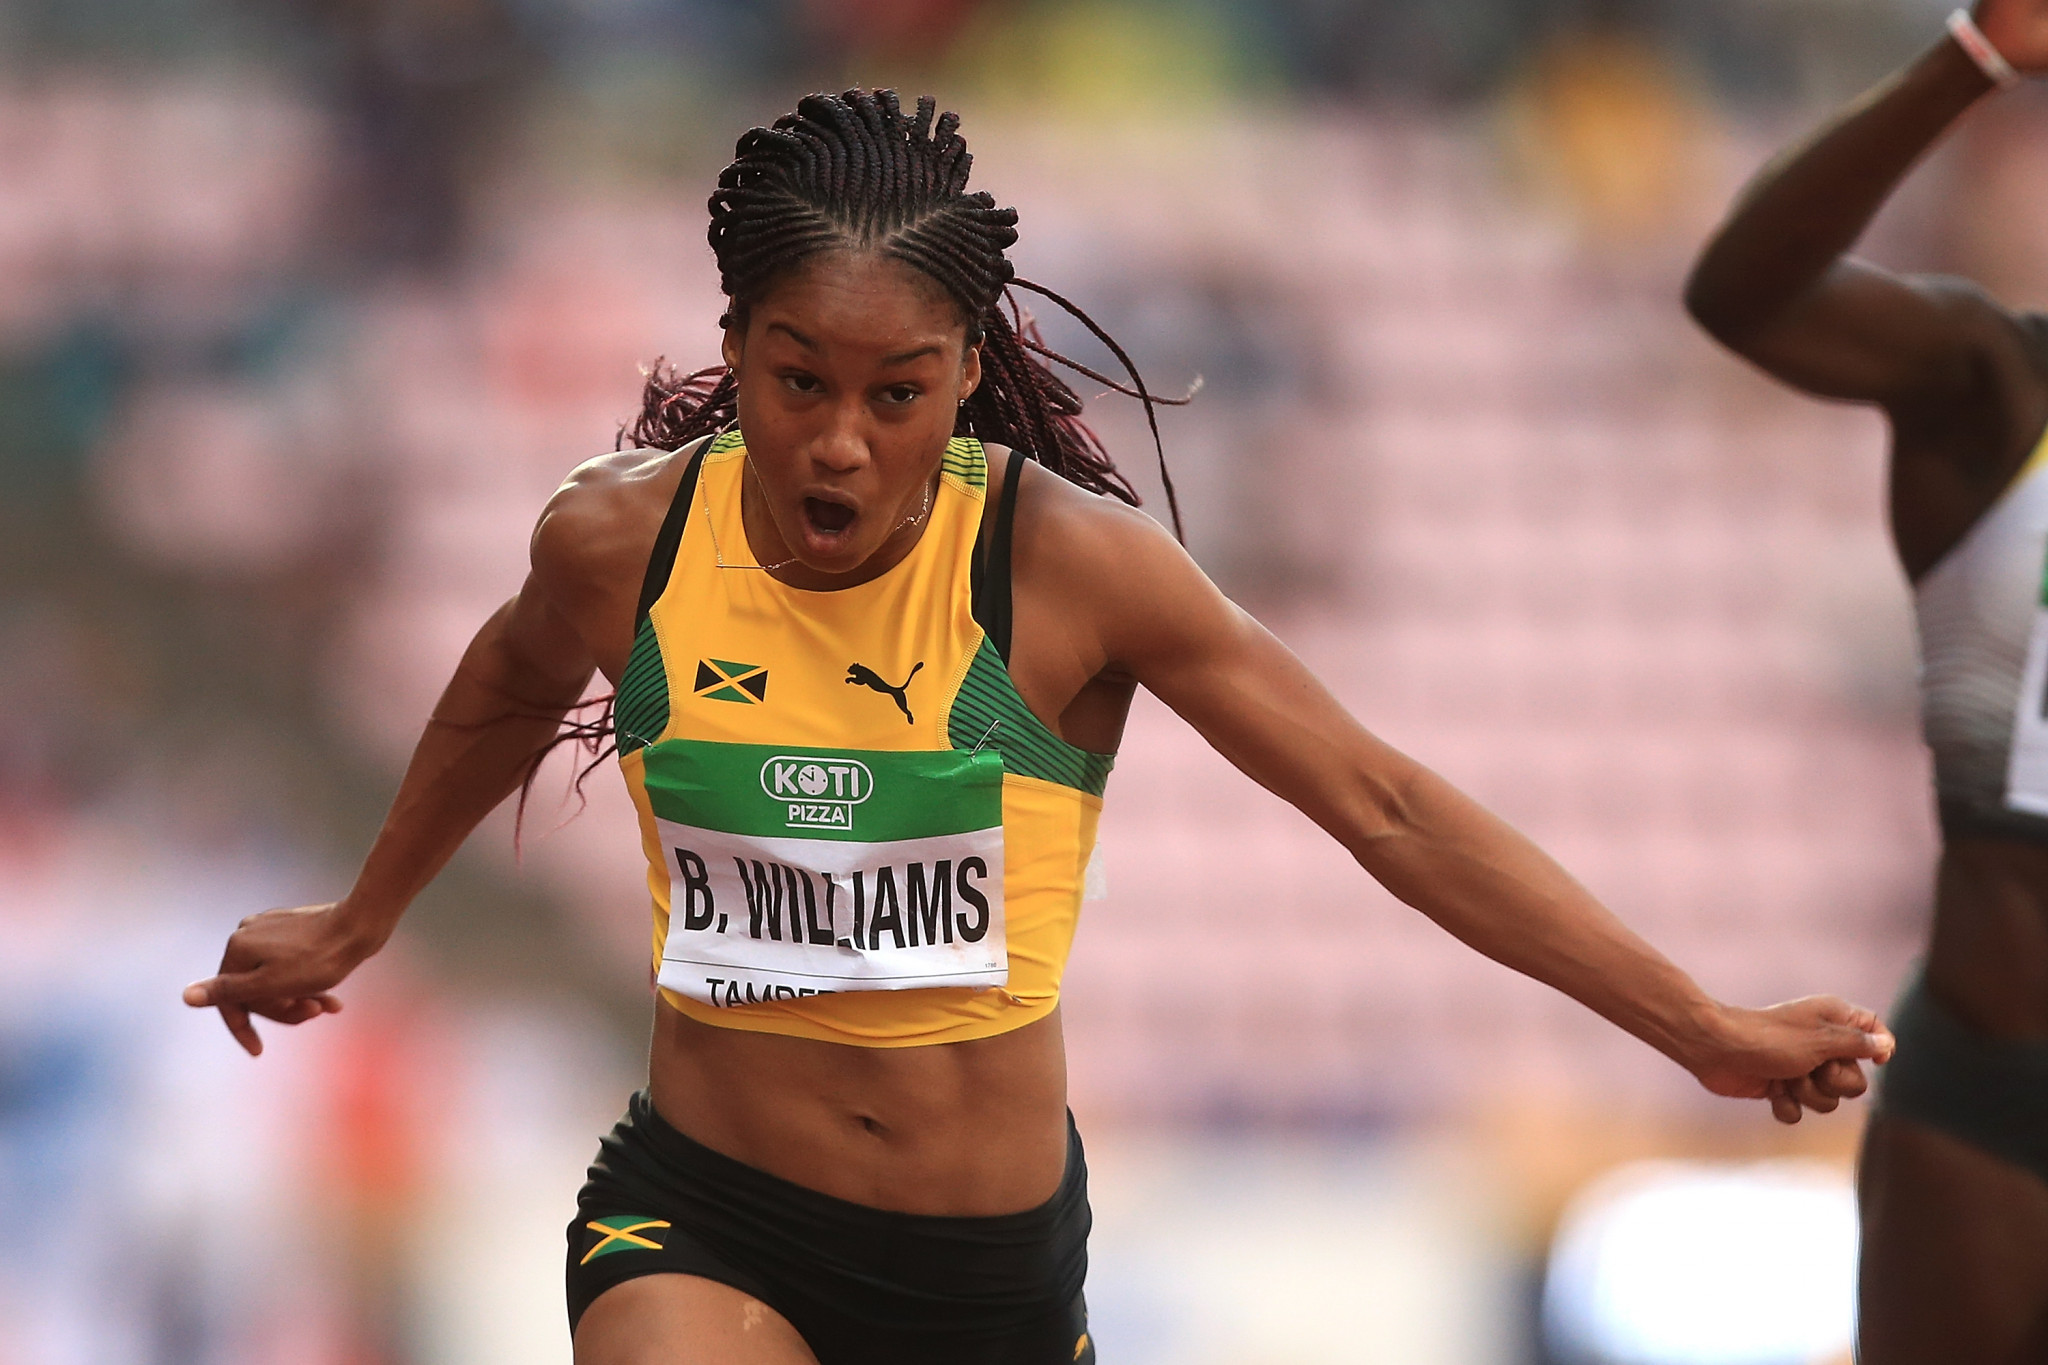 Briana Williams faces a doping hearing just days before the start of the World Championships ©Getty Images